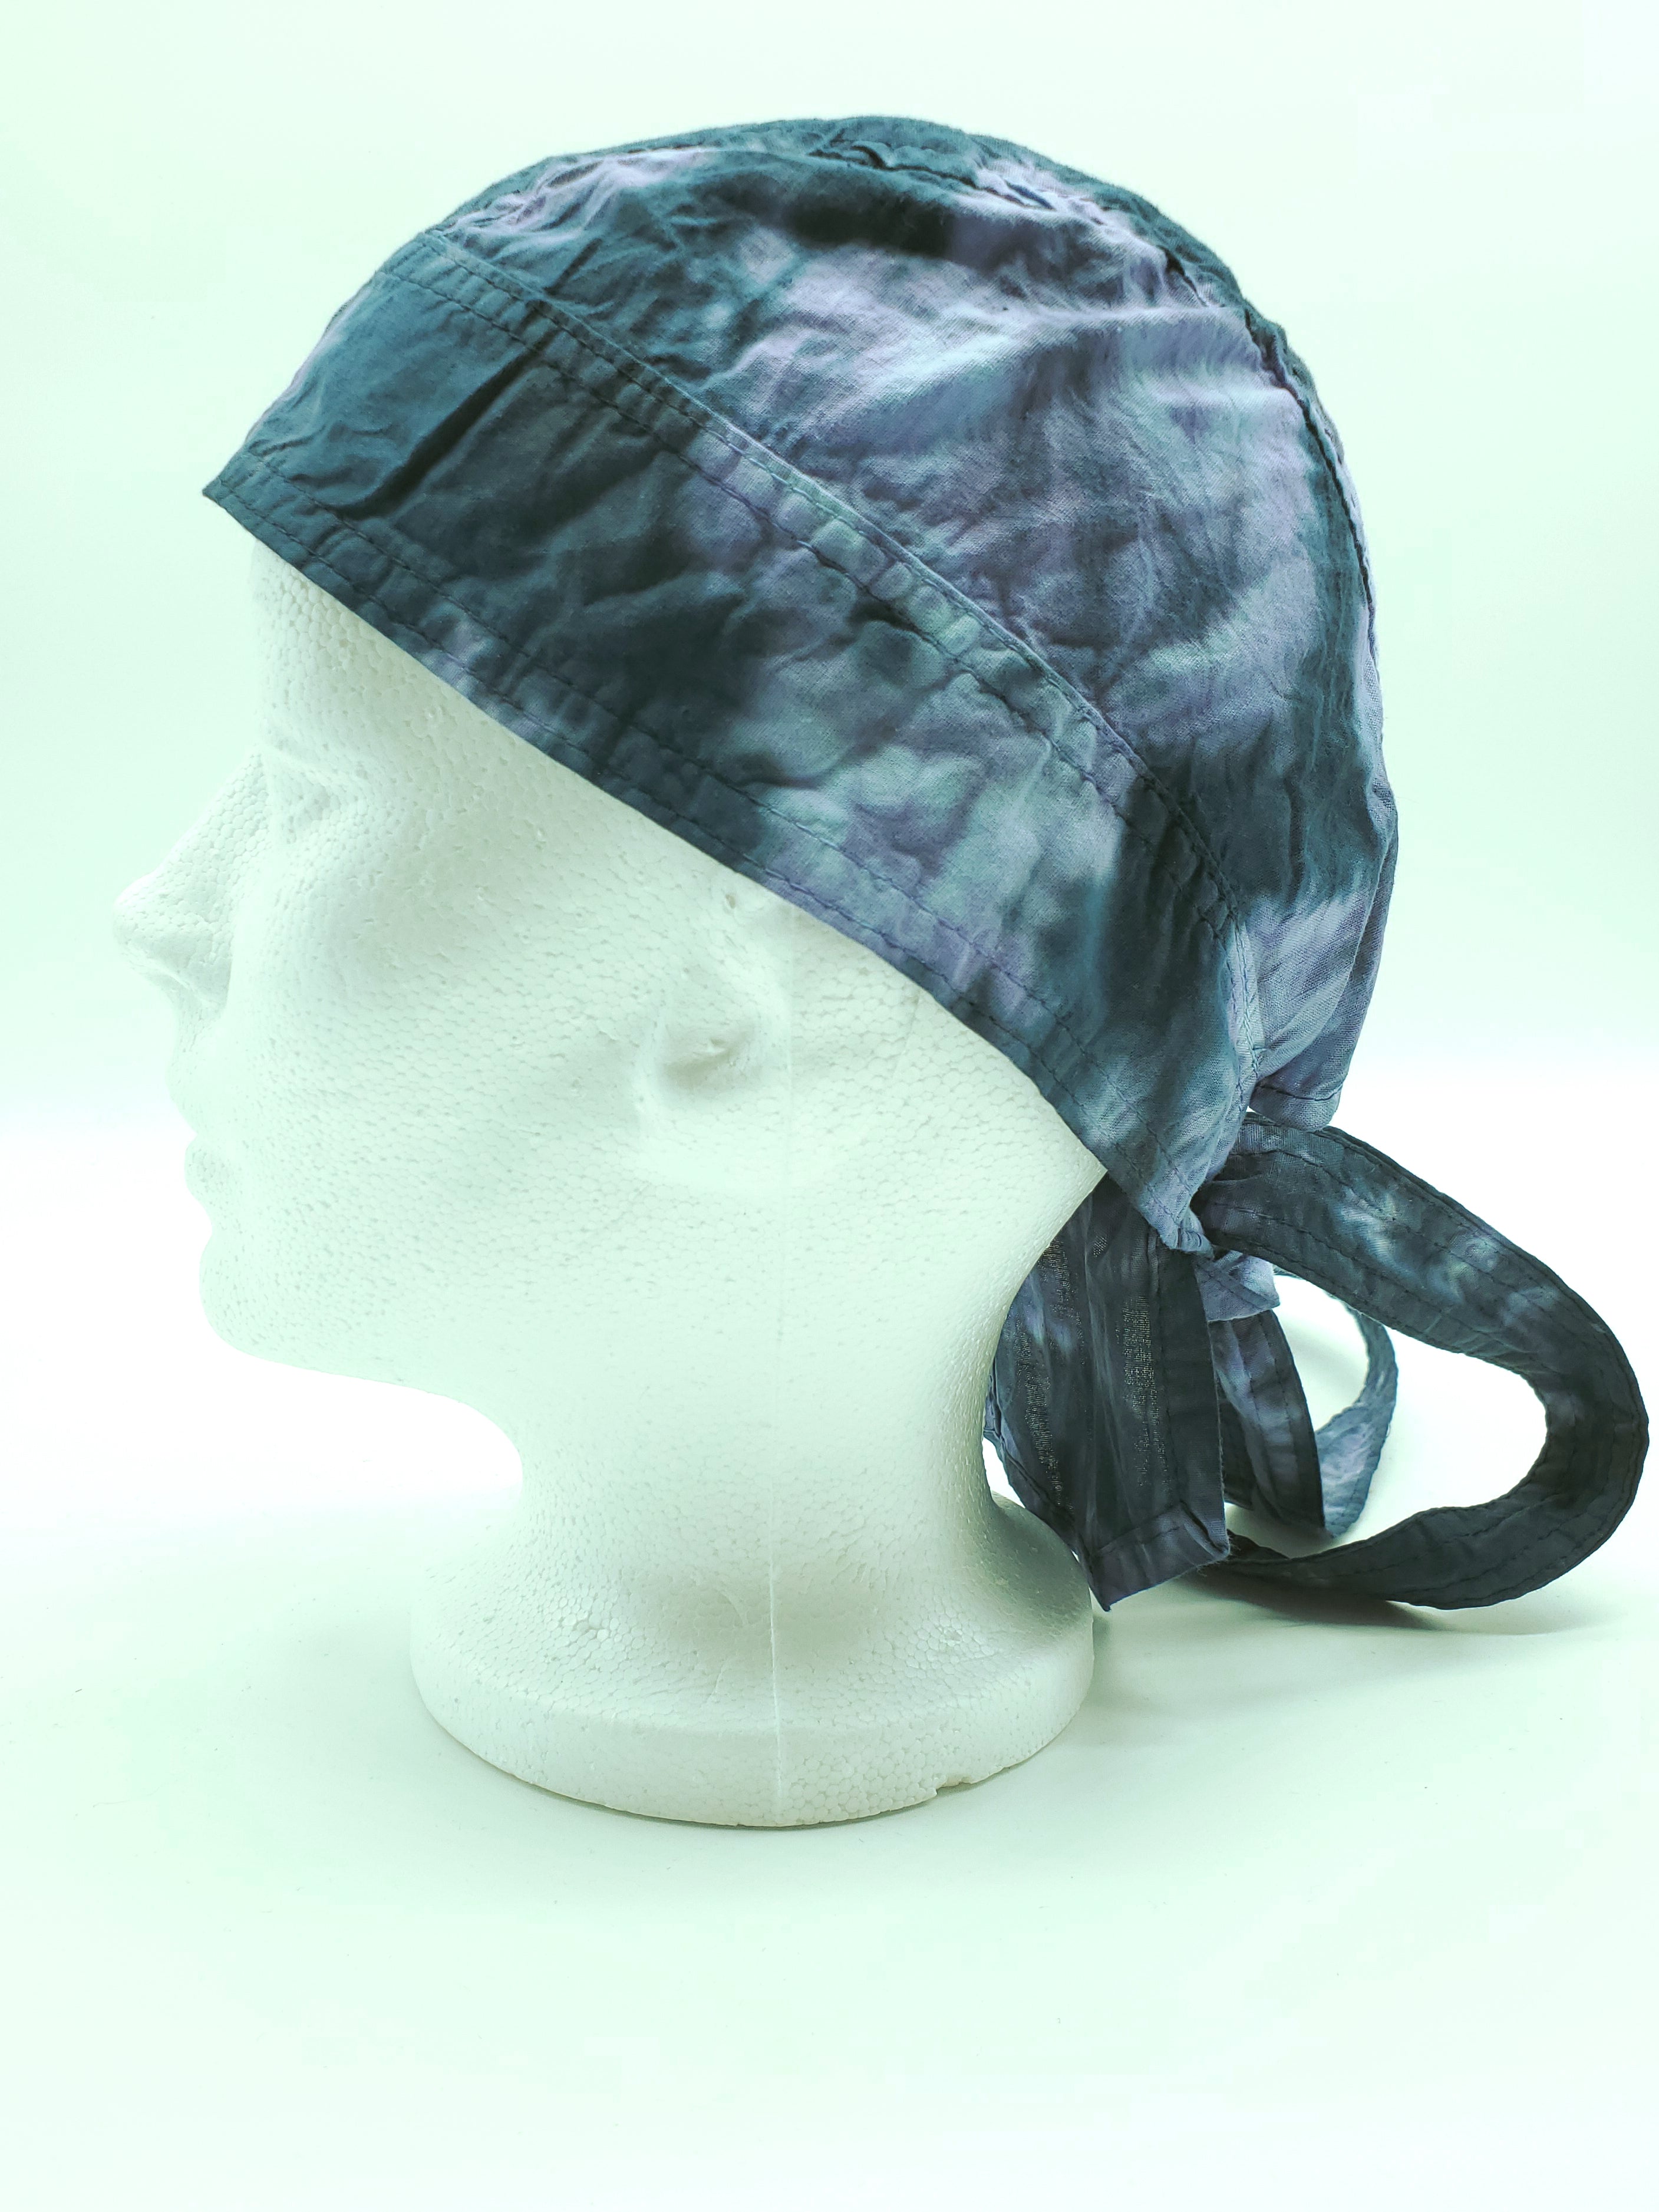 Purple and Black Tie Dyed Kerchief - The Caffeinated Raven